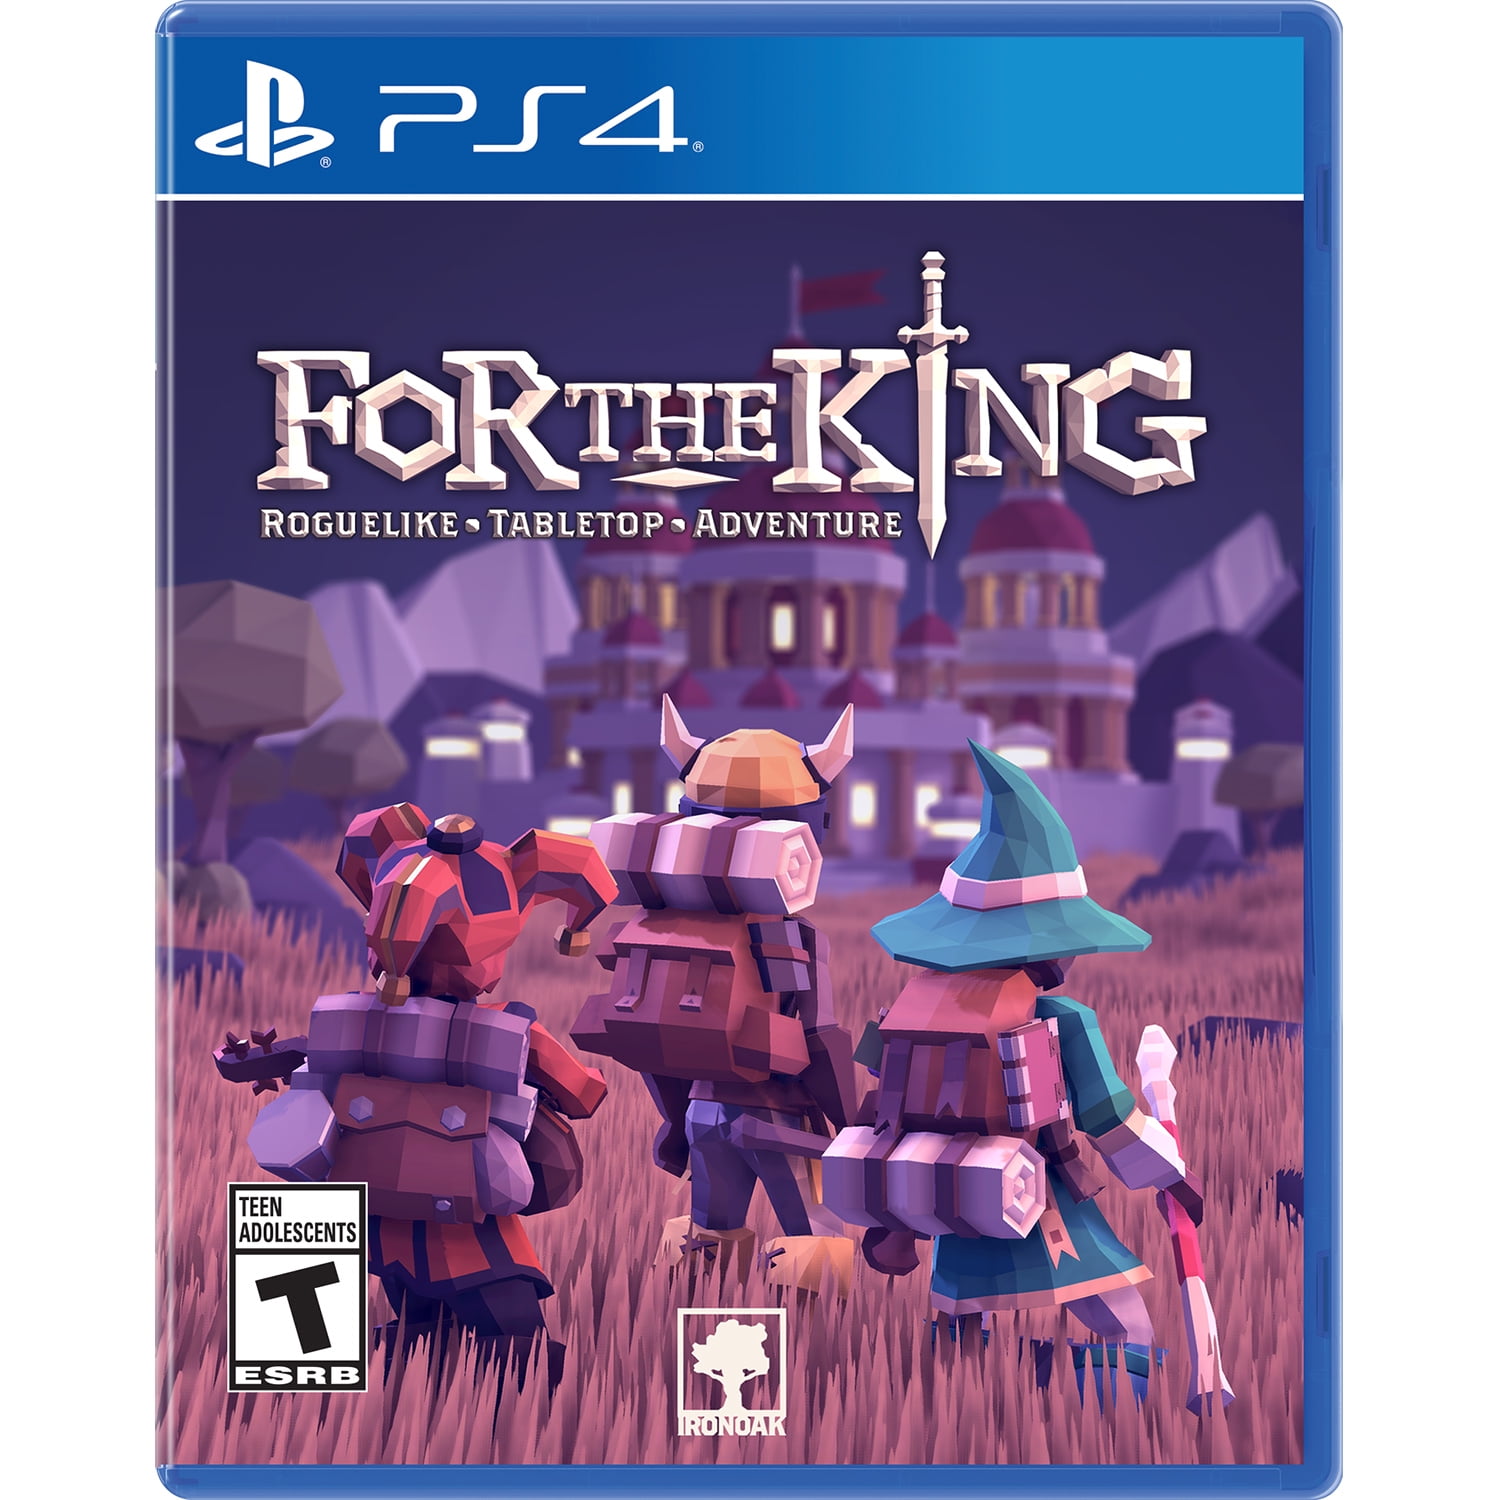 King ps4. For the King ps4. Игры 12+. PS-4 for the King Roguelike Tabletop Adventure. МАНКЕЙ Кинг пс4.